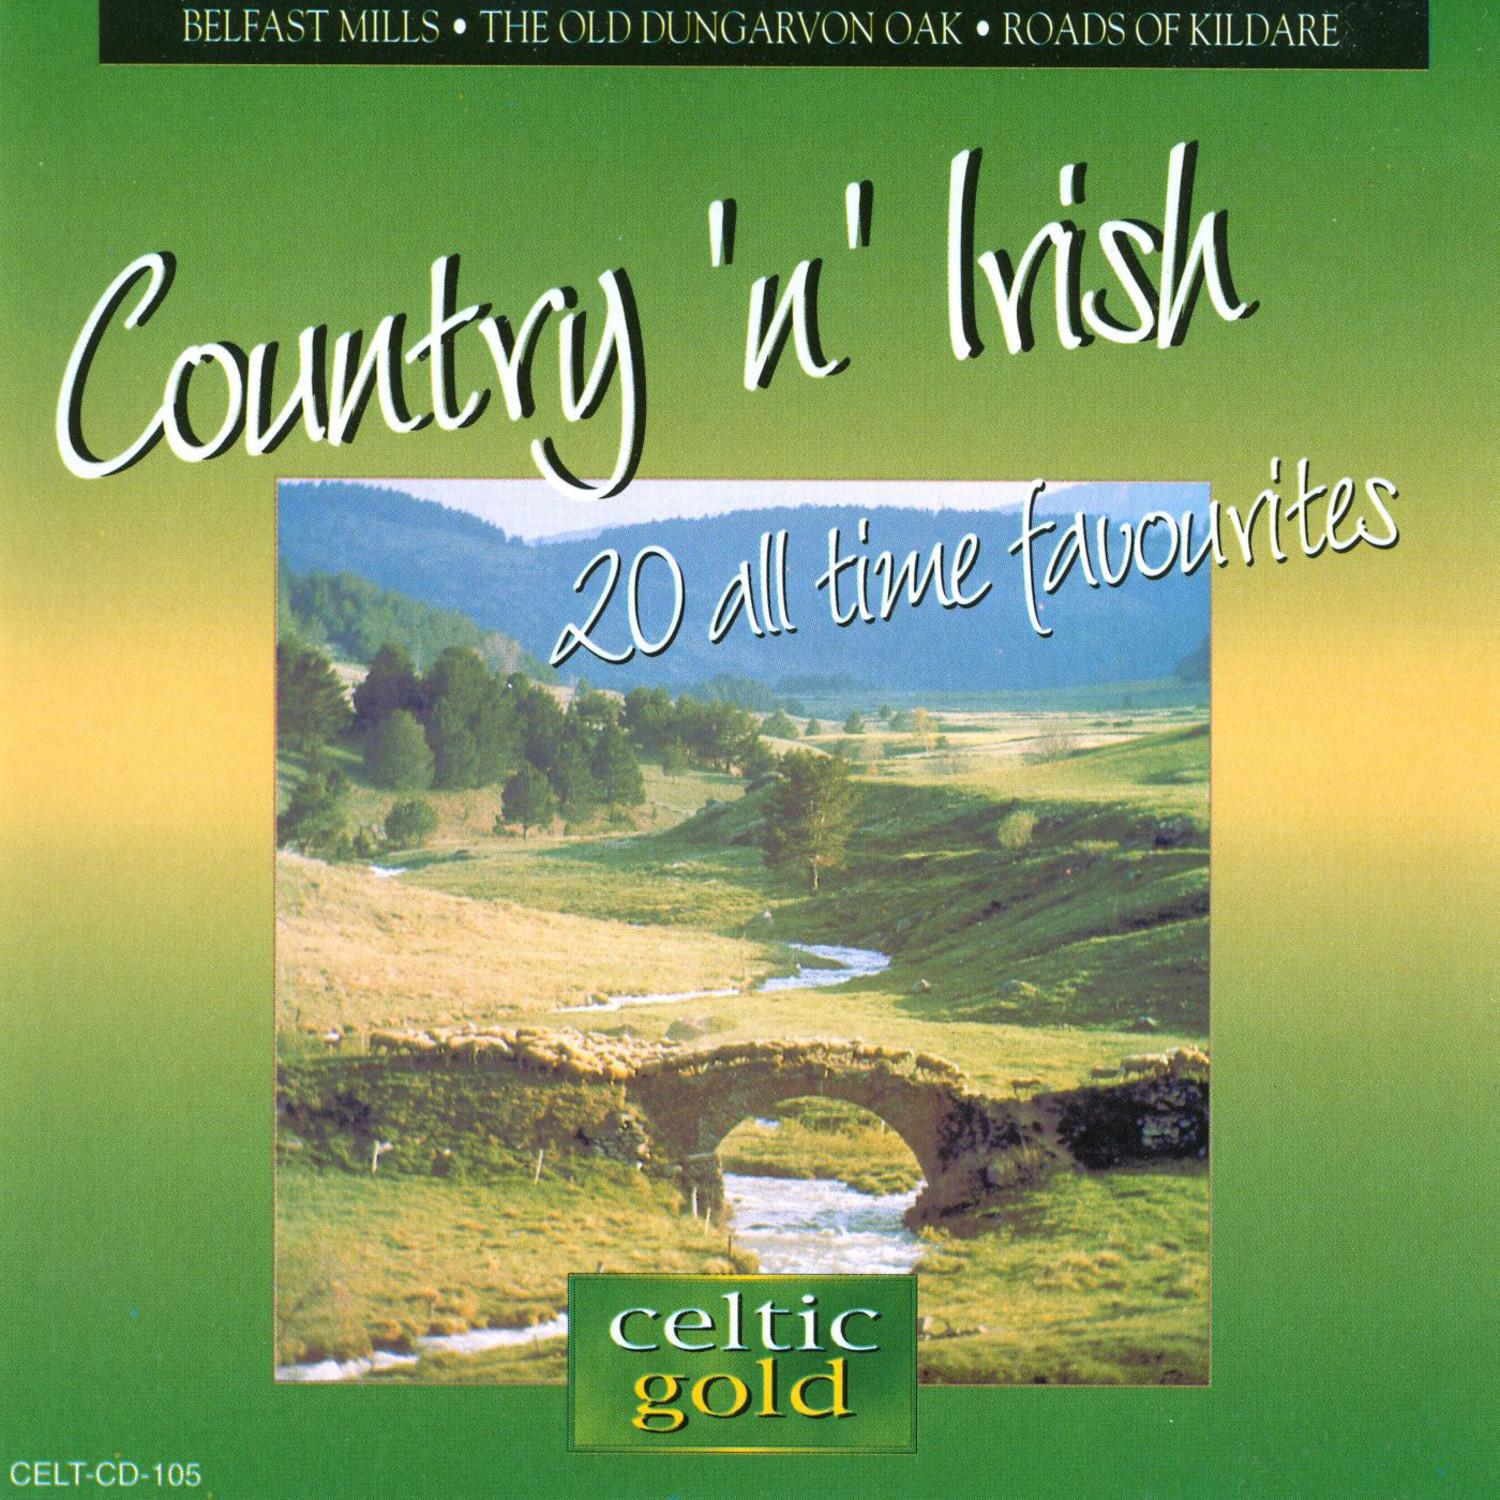 Country 'n' Irish - 20 All Time Favourites